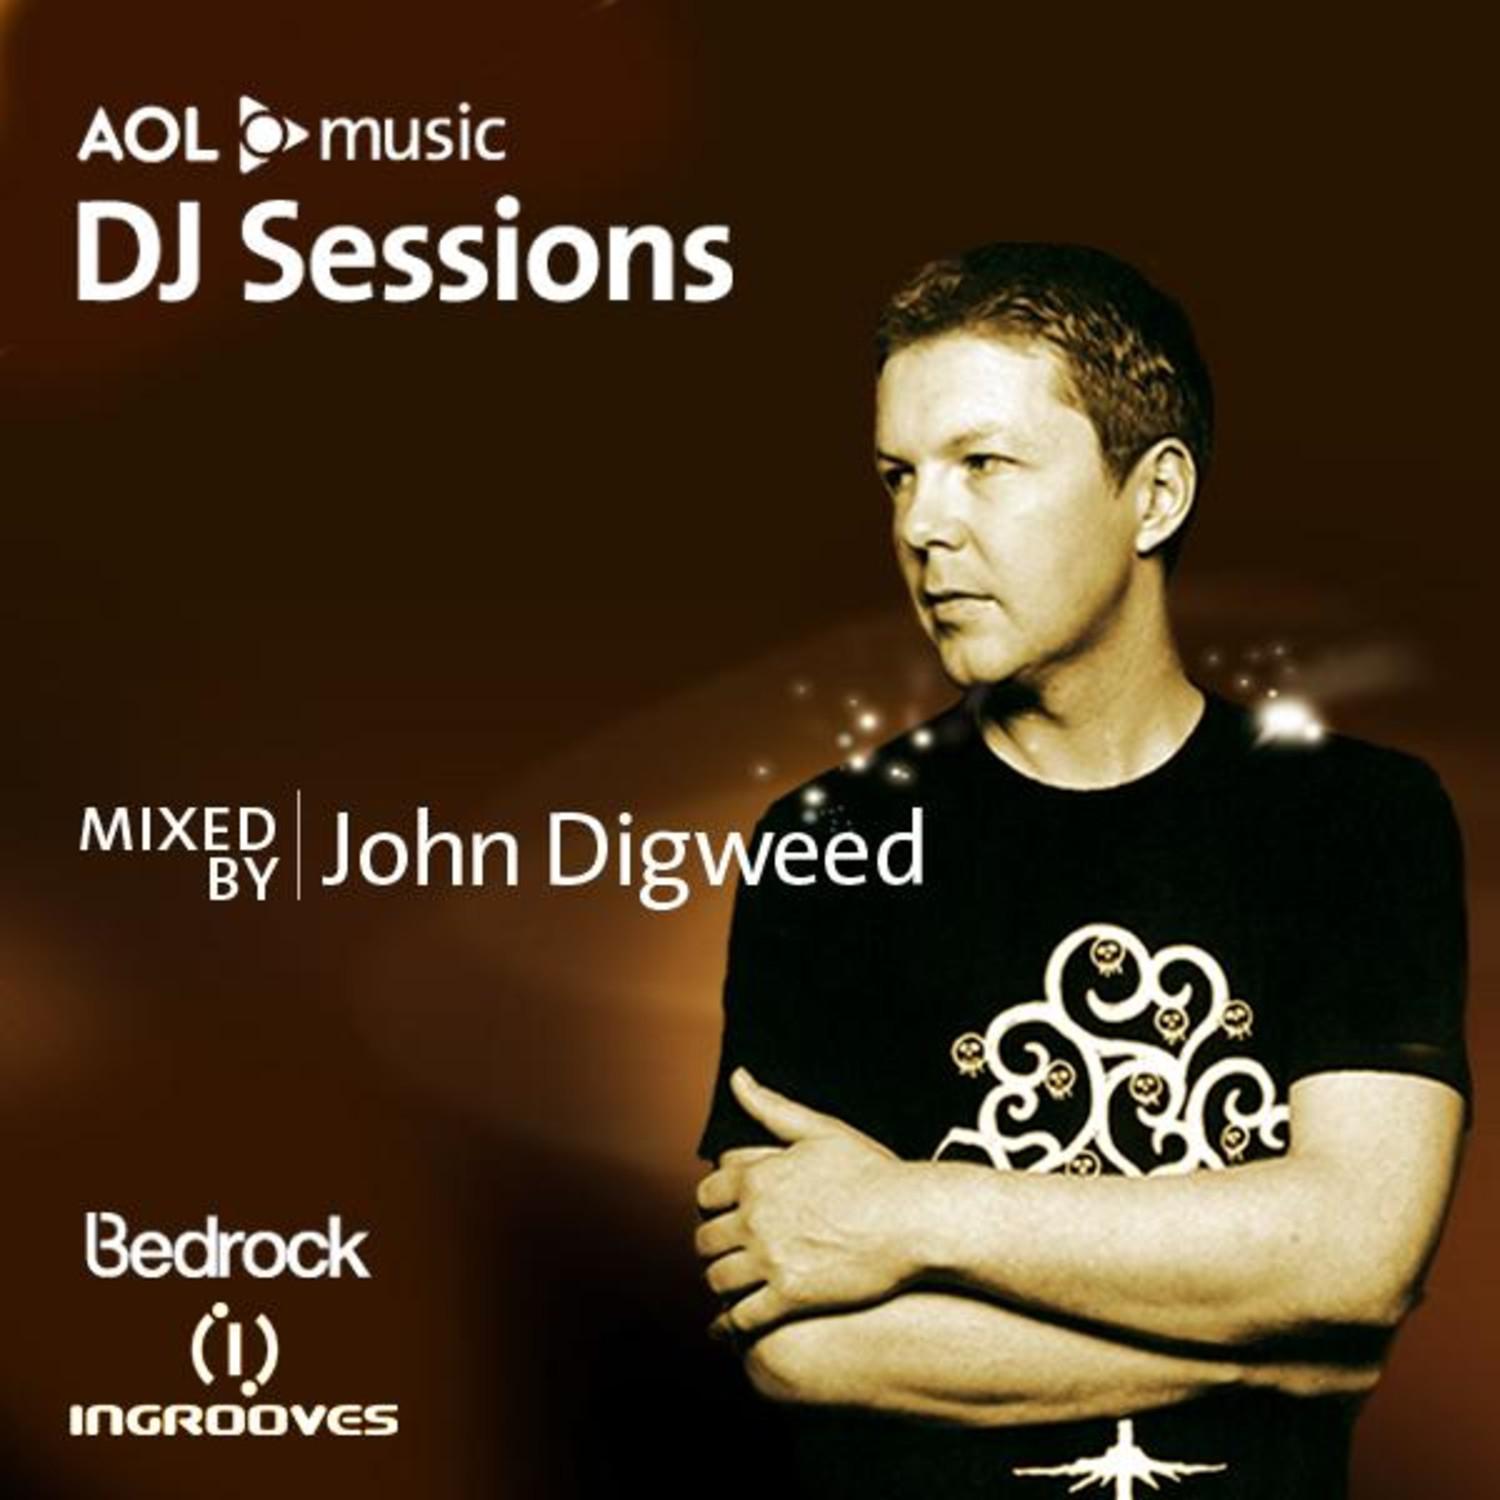 AOL Music DJ Sessions, Mixed by John Dig****